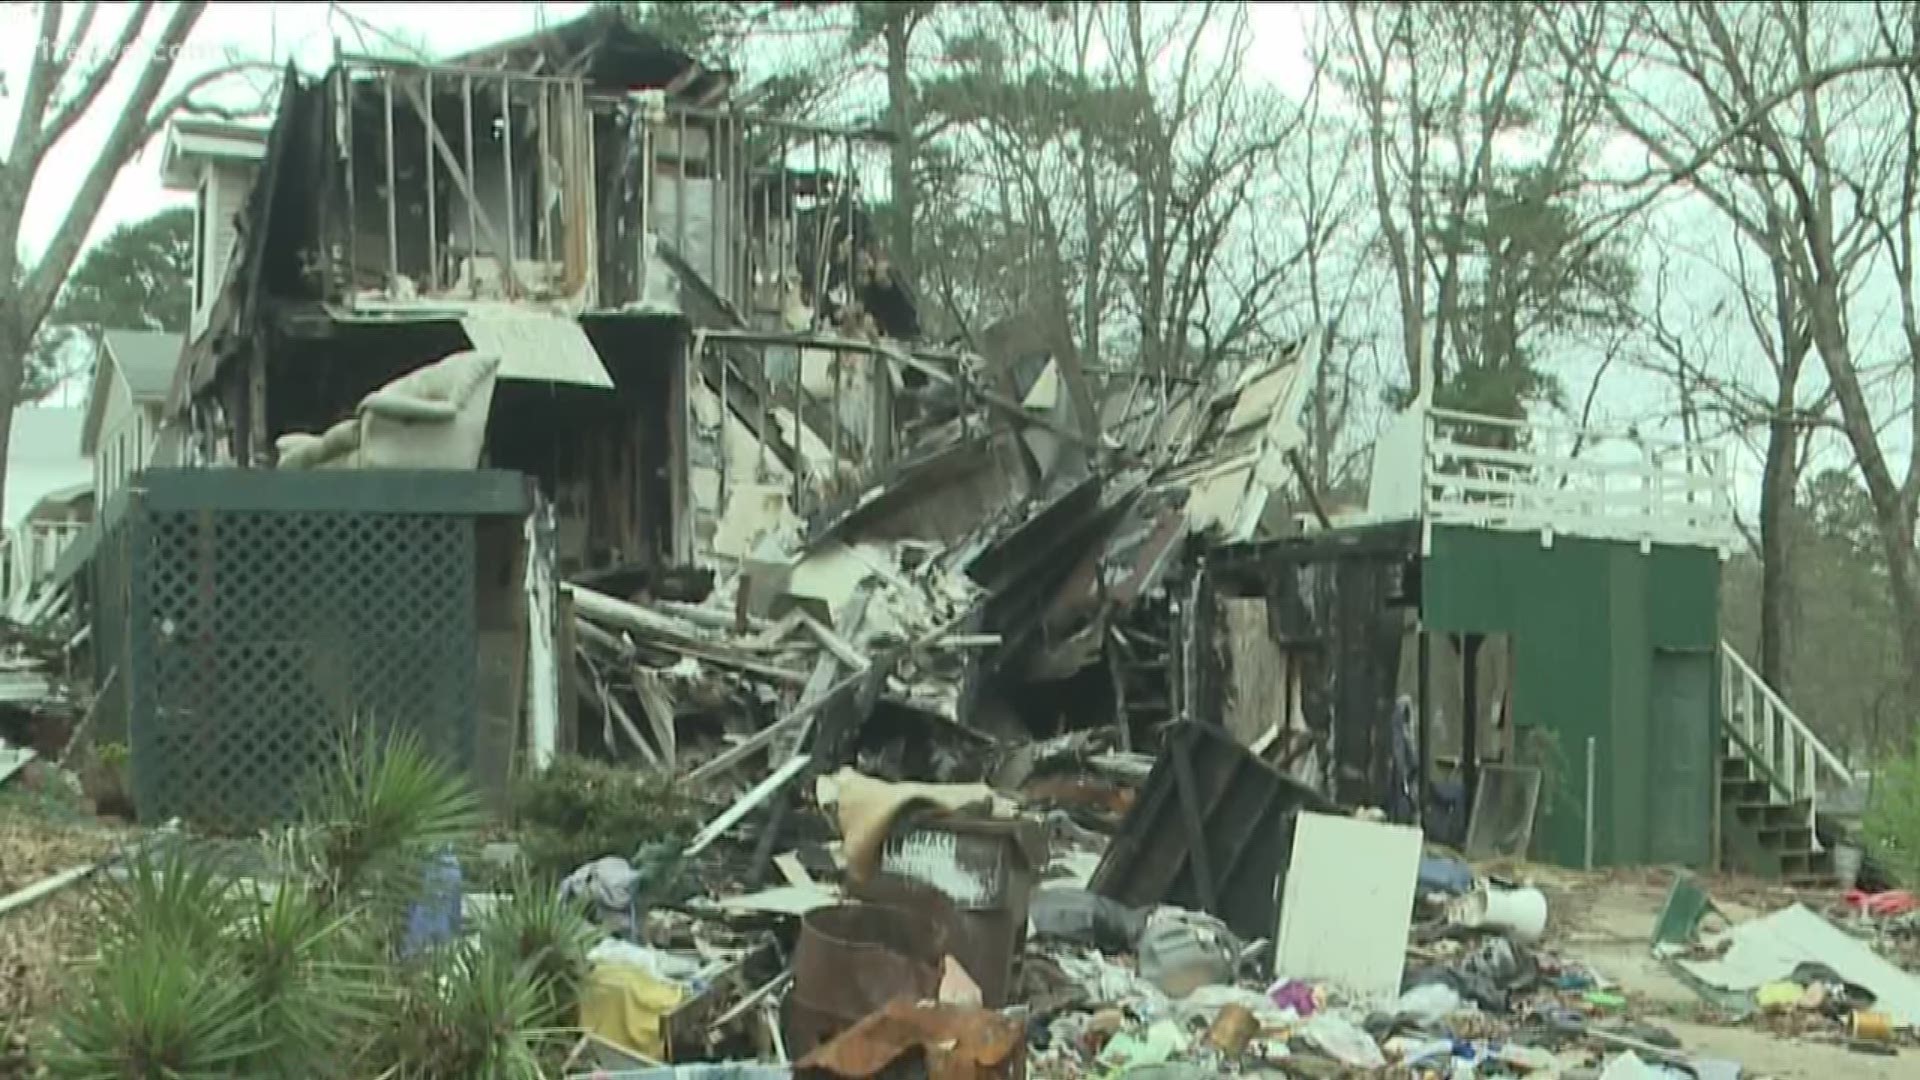 11Alive spoke with neighbors who fear the delapidated remains of the home are a safety hazard to children. The new owner says weather has delayed the process.